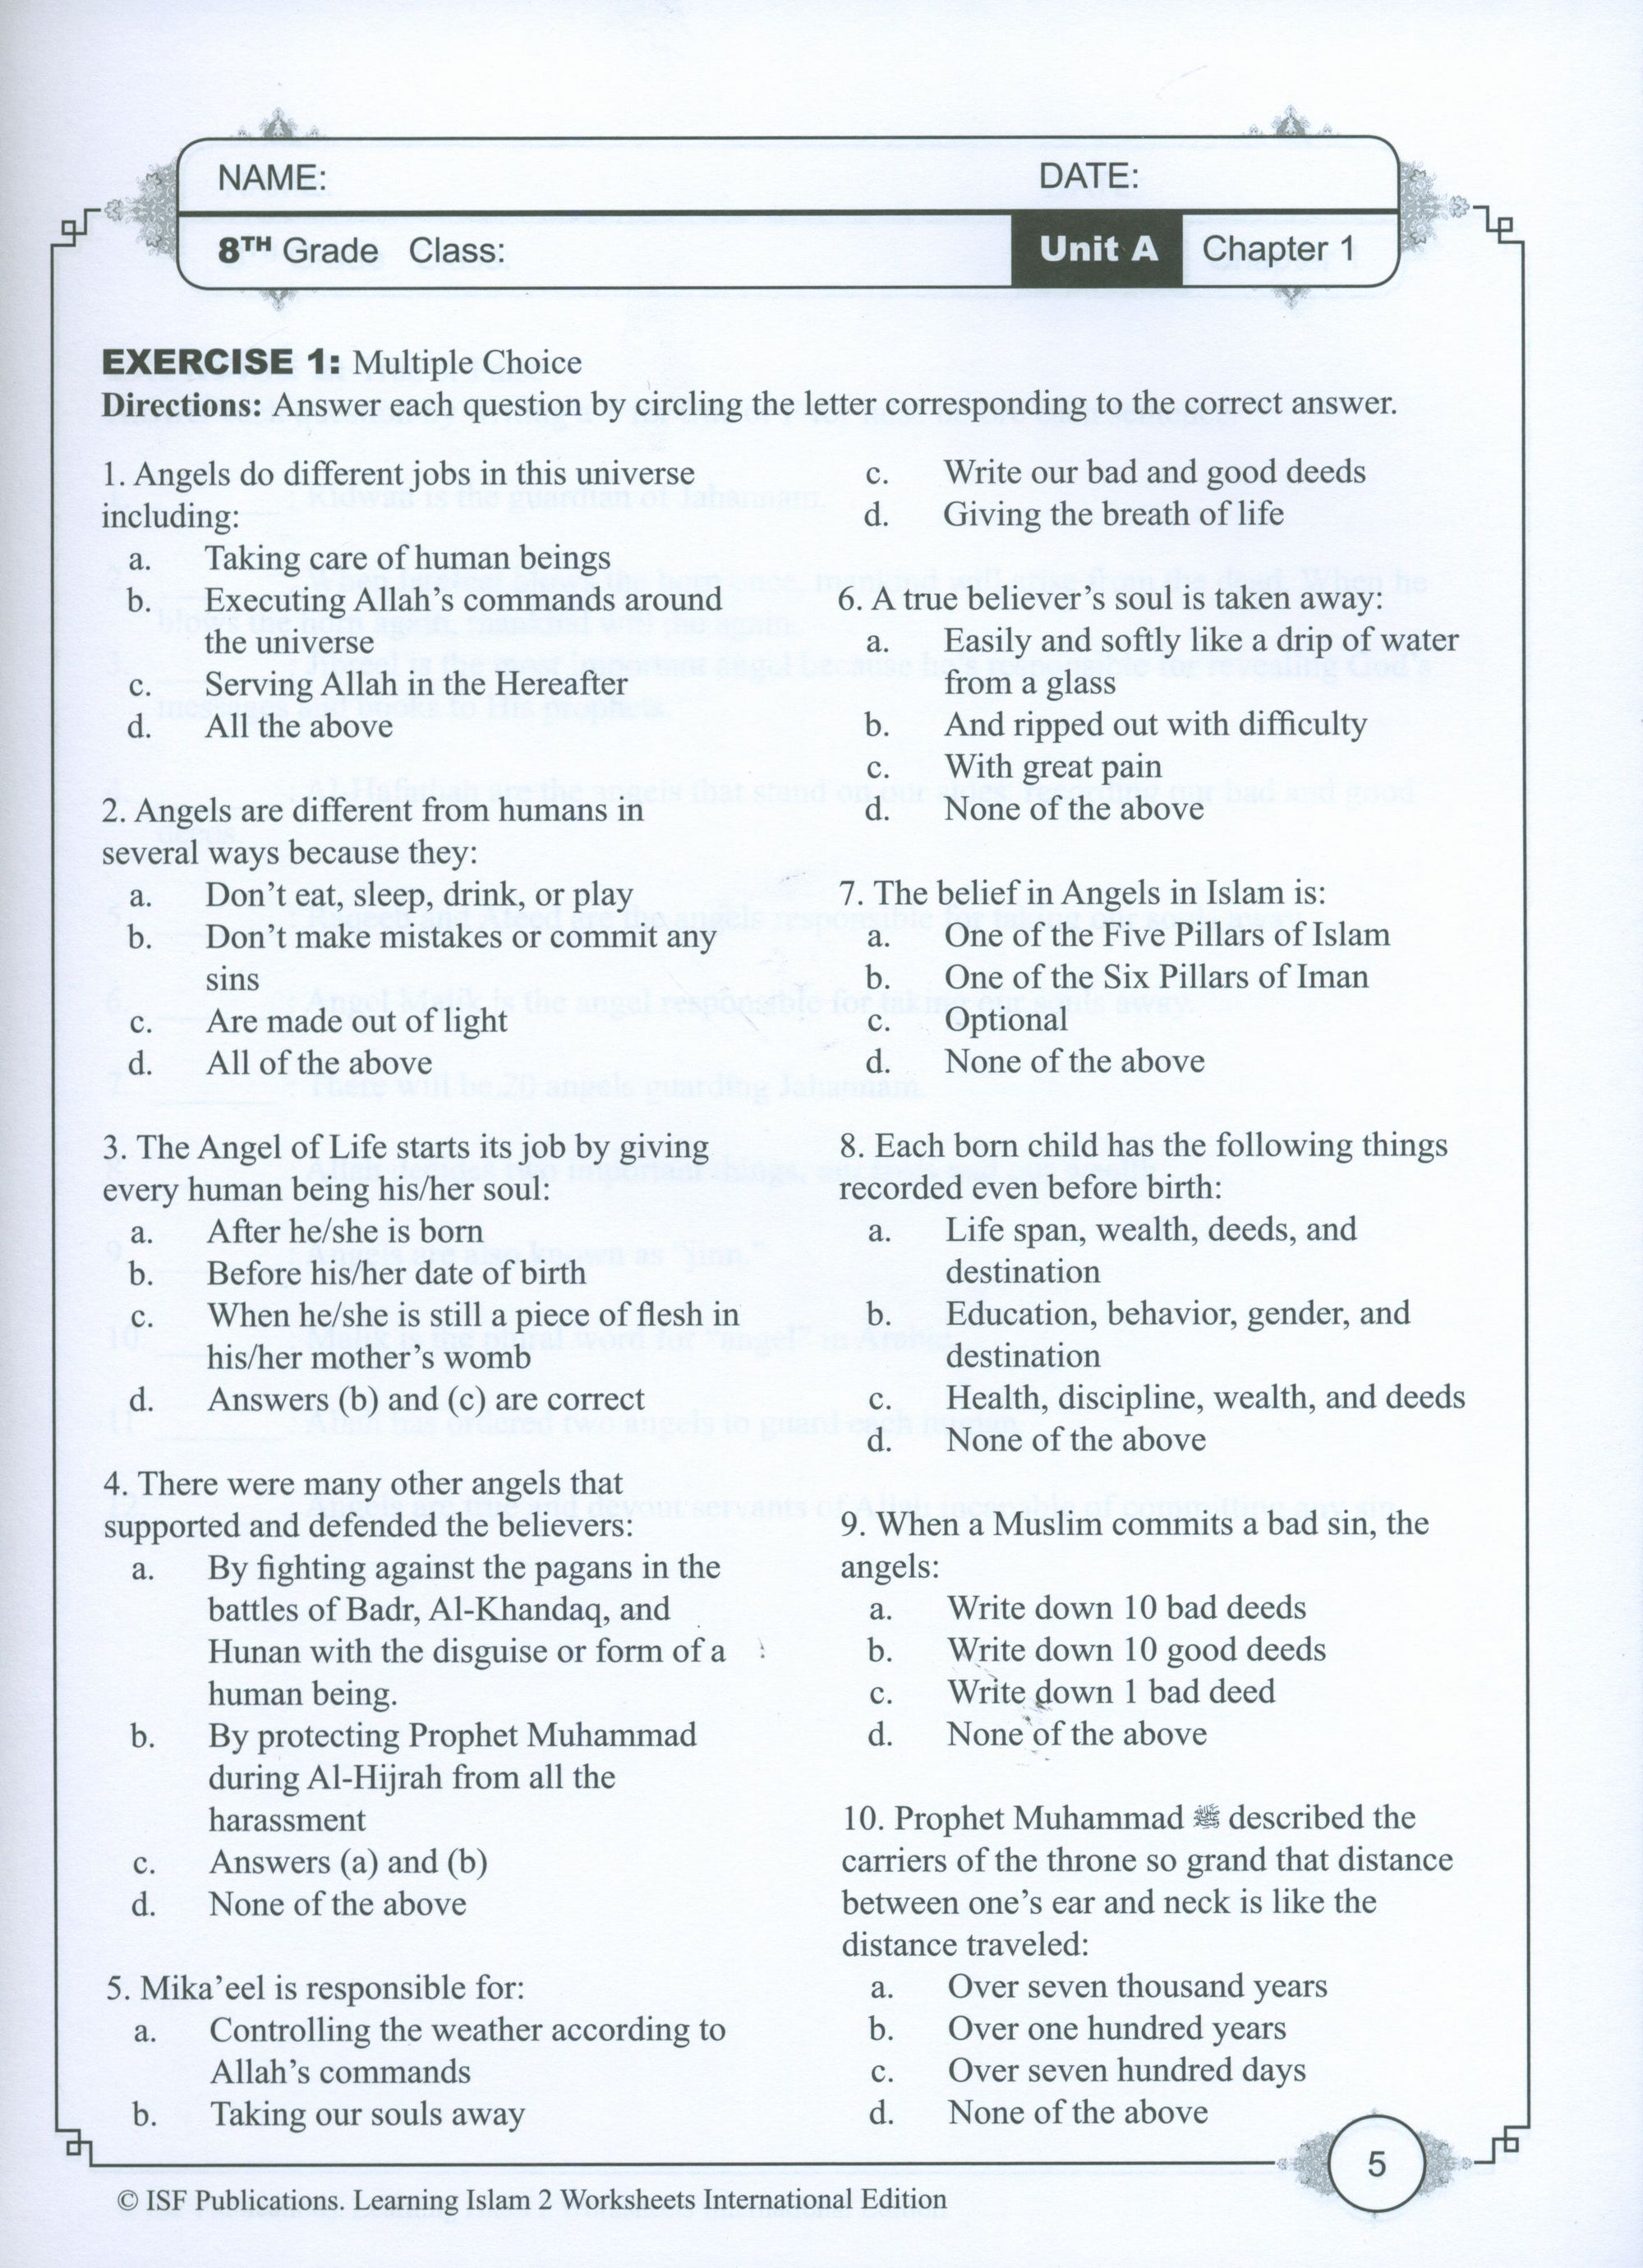 Learning Islam Weekend Edition Worksheets Level 2 (7th Grade)